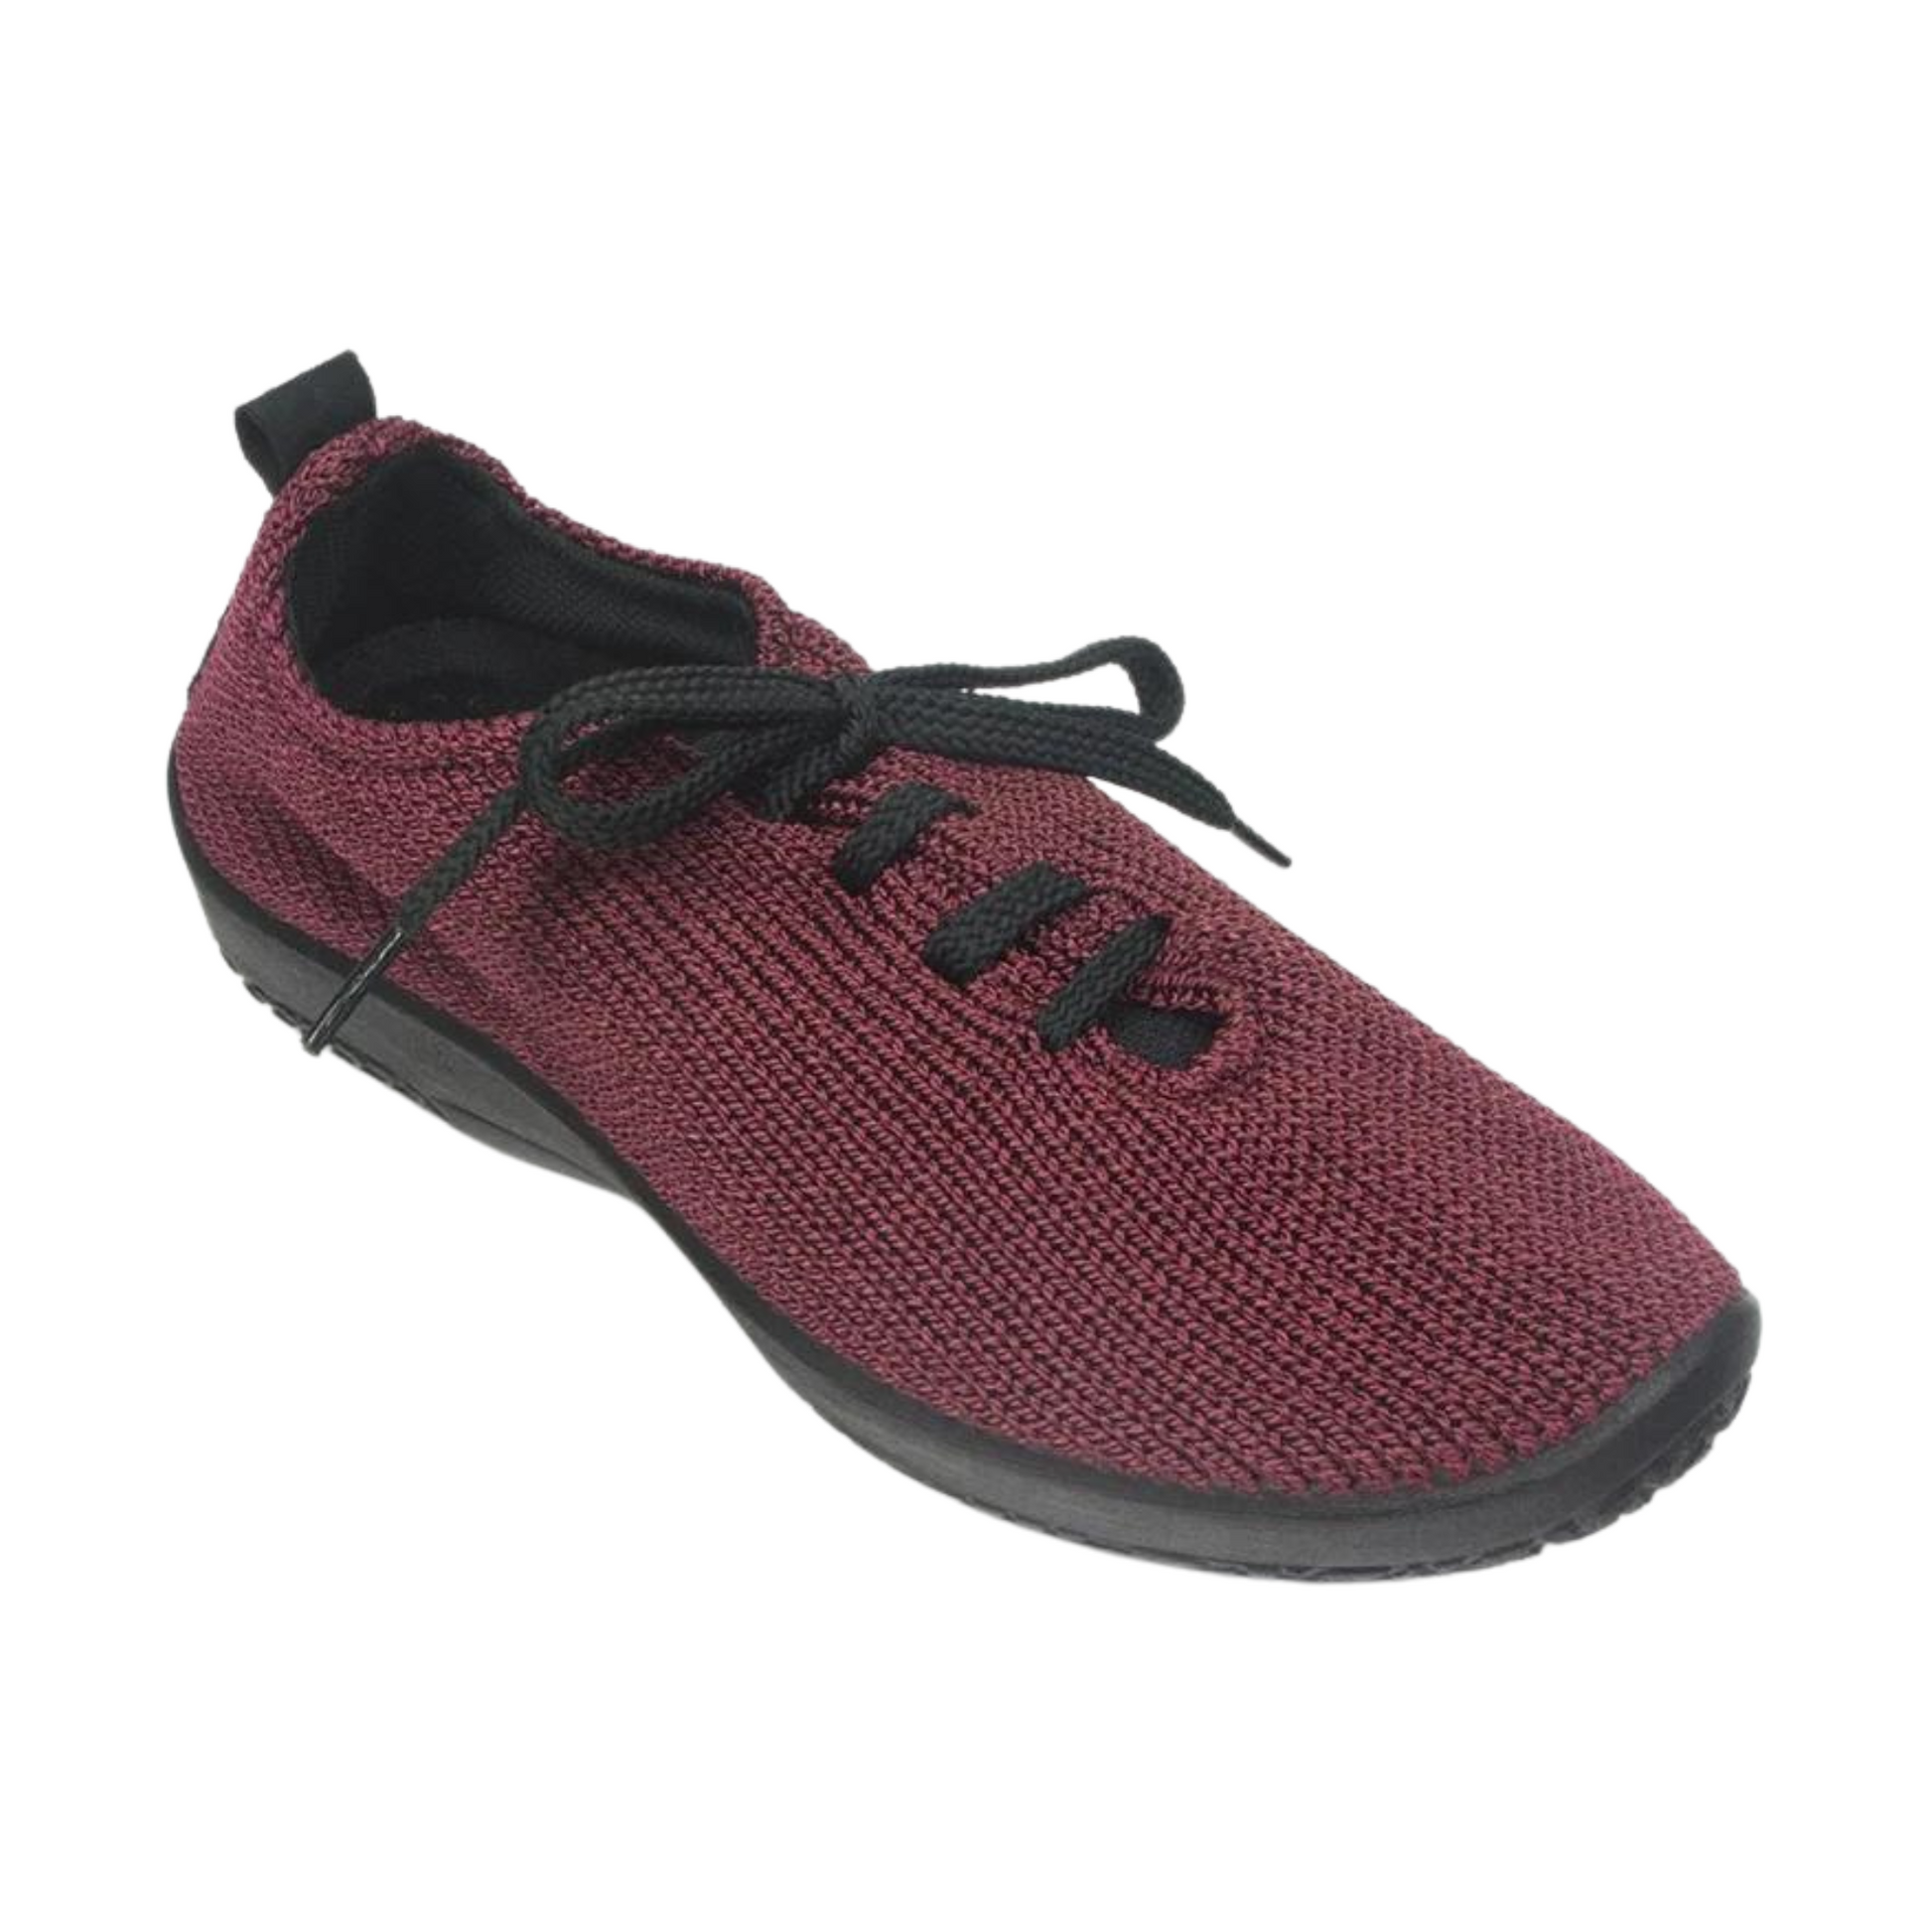 A right angle view of a burgundy coloured knit shoe with black laces.